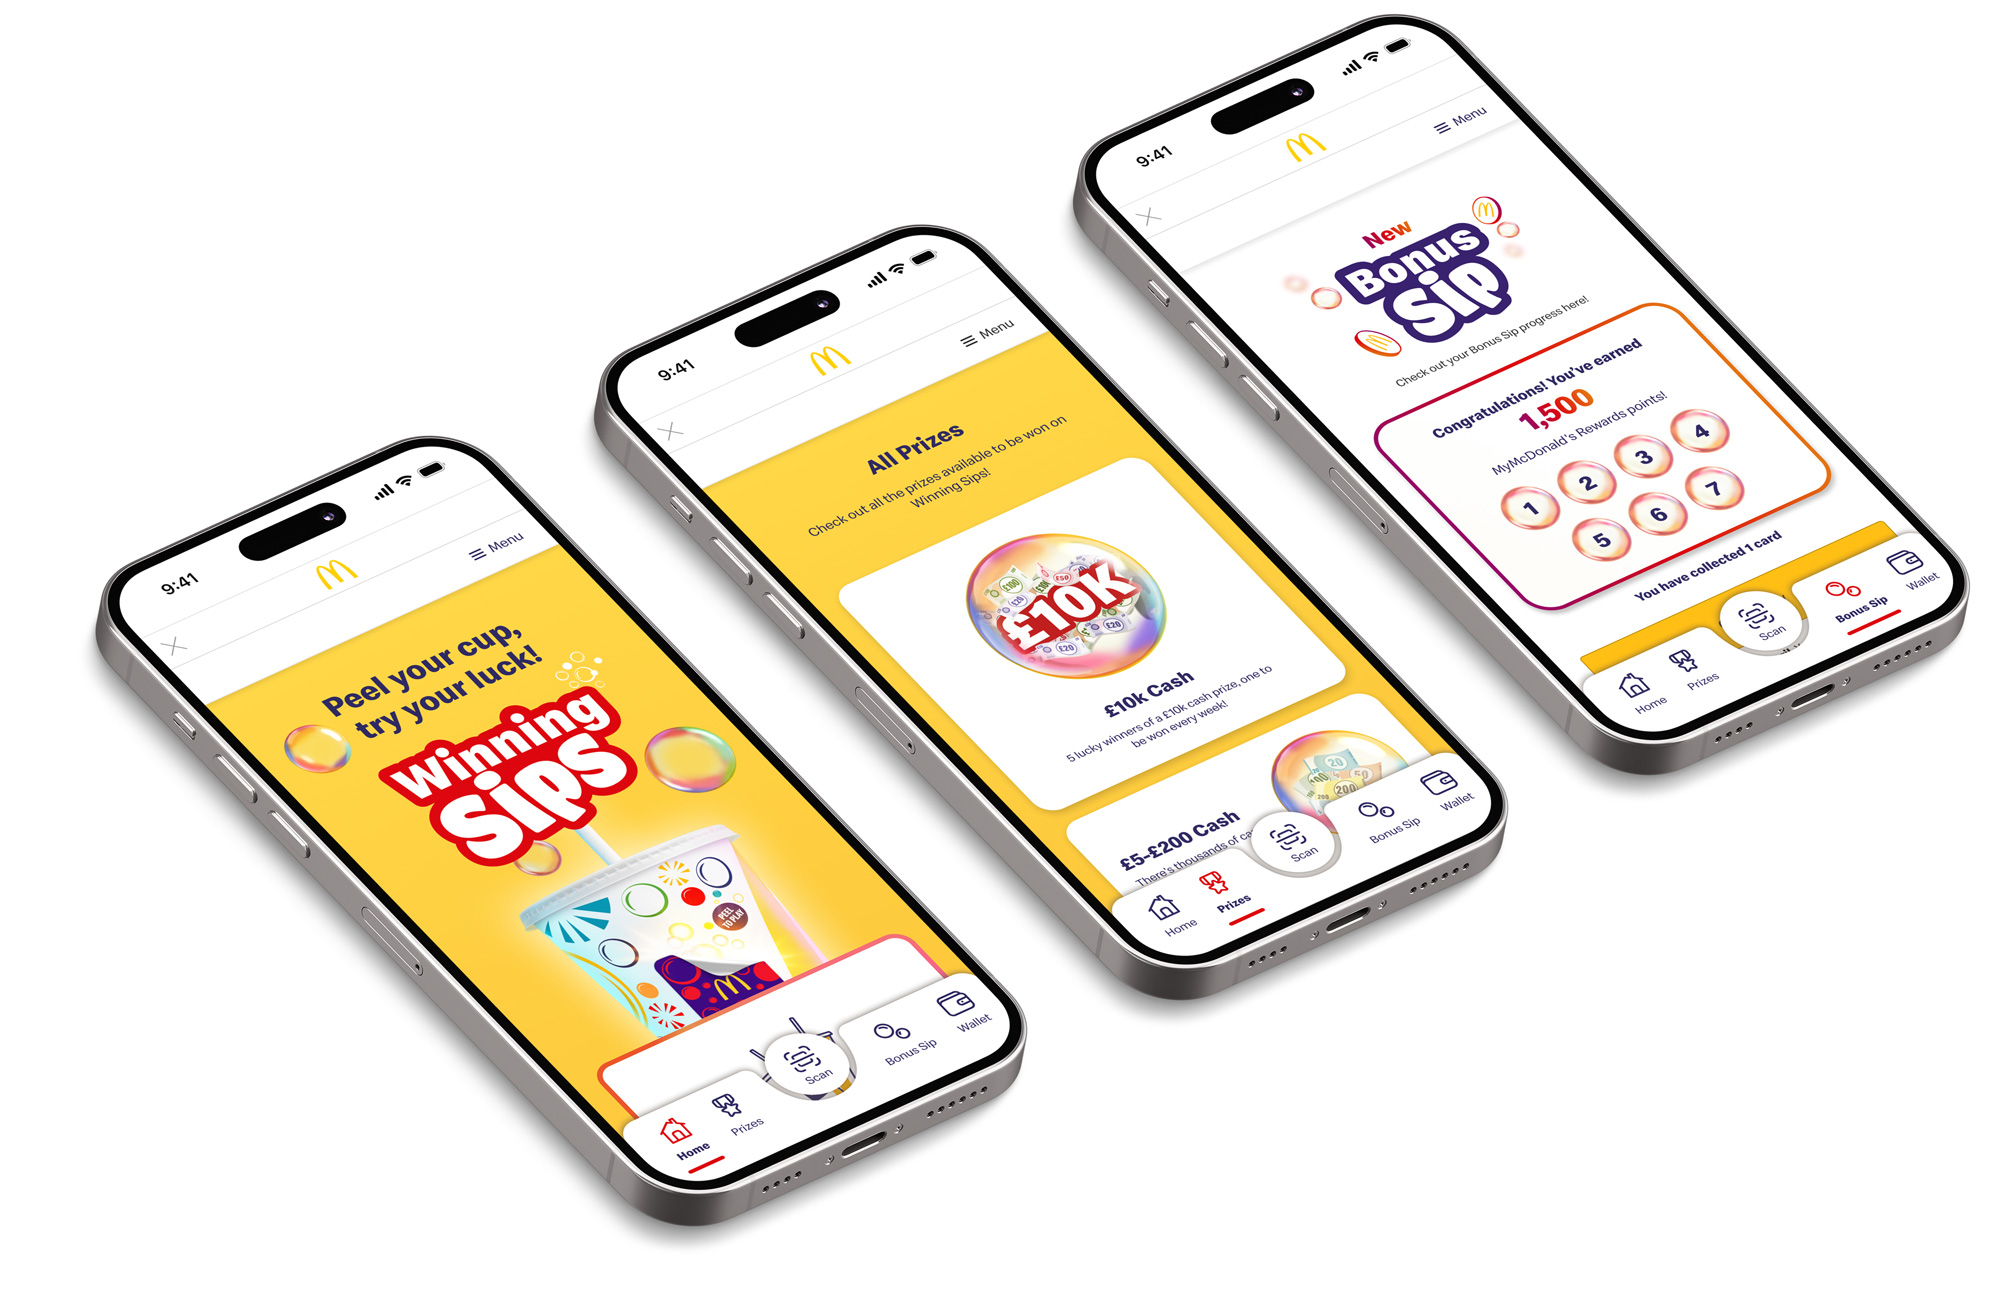 Image of 3 phone screens in the Winning Sips page of McDonald's app